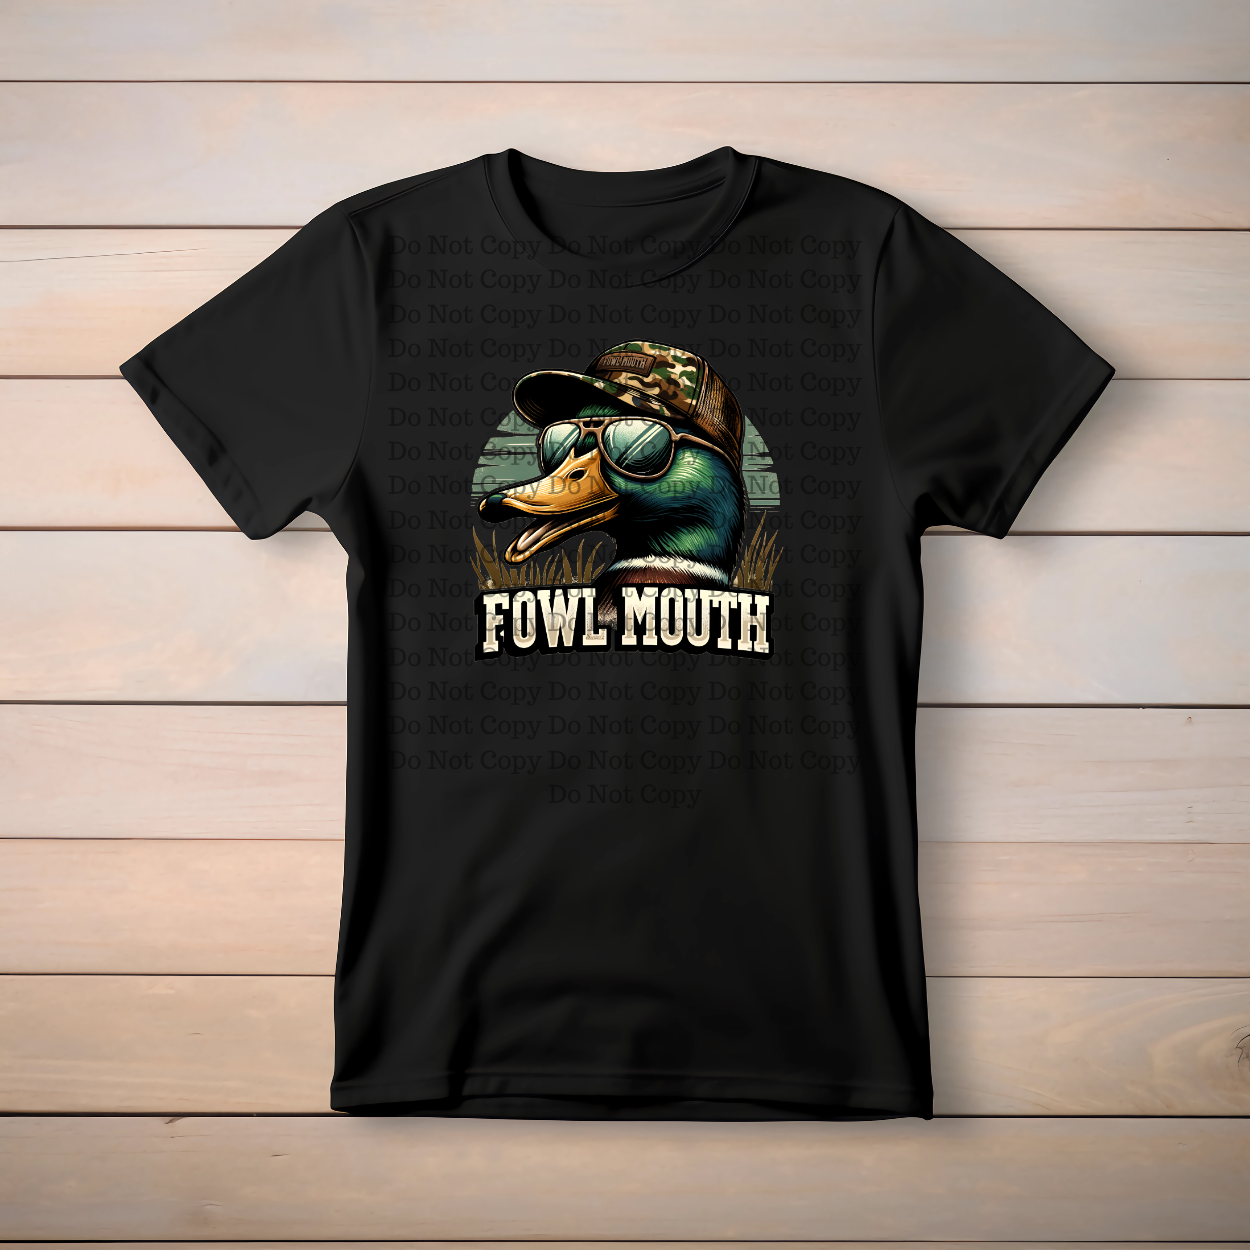 Fowl Mouth